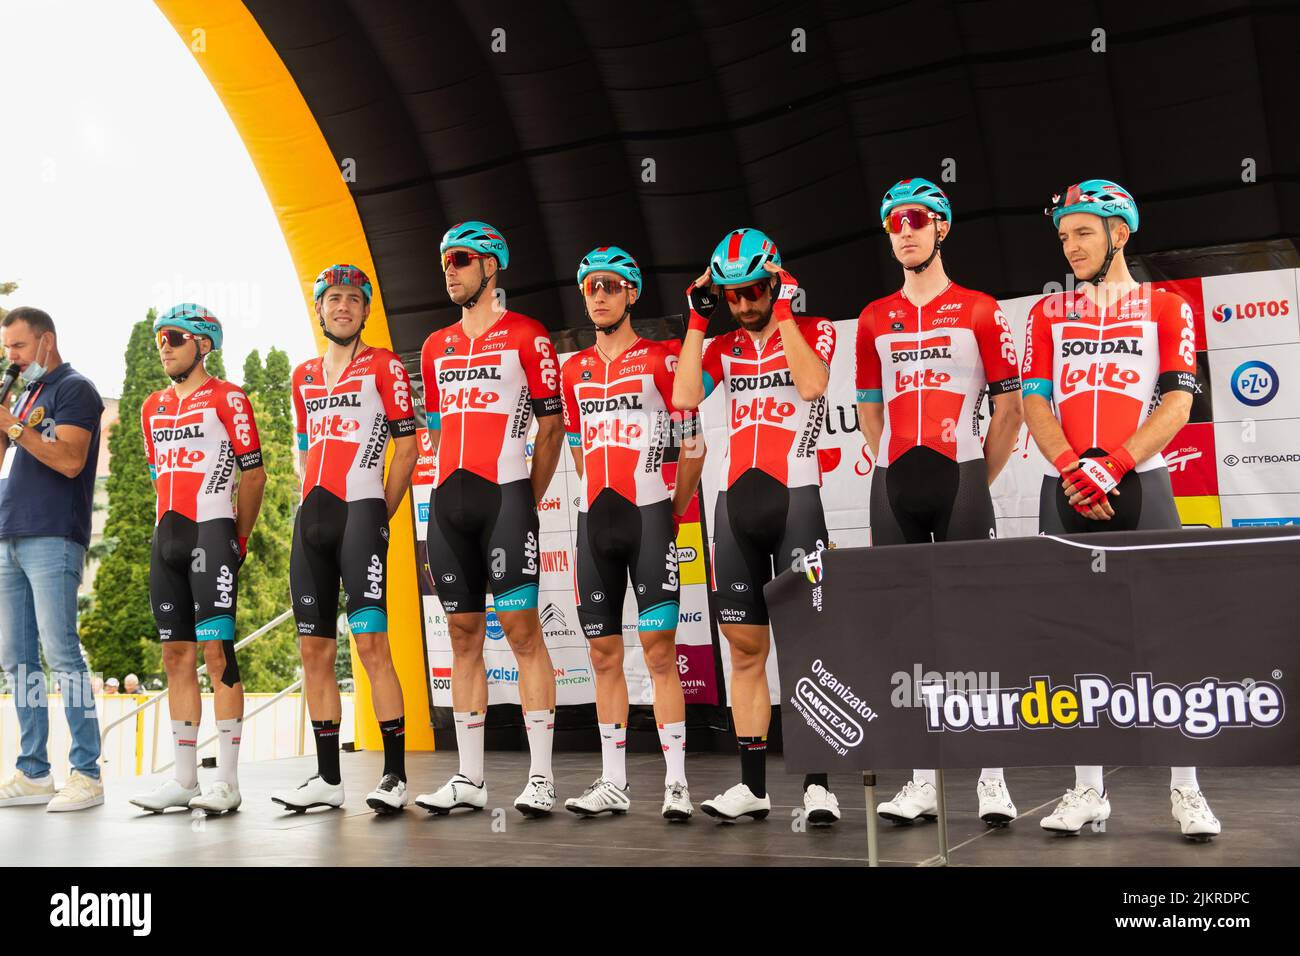 Chelm, Lubelskie, Poland - July 31, 2022: 79 tour de Pologne, Presentation of the Lotto Soudal team Stock Photo